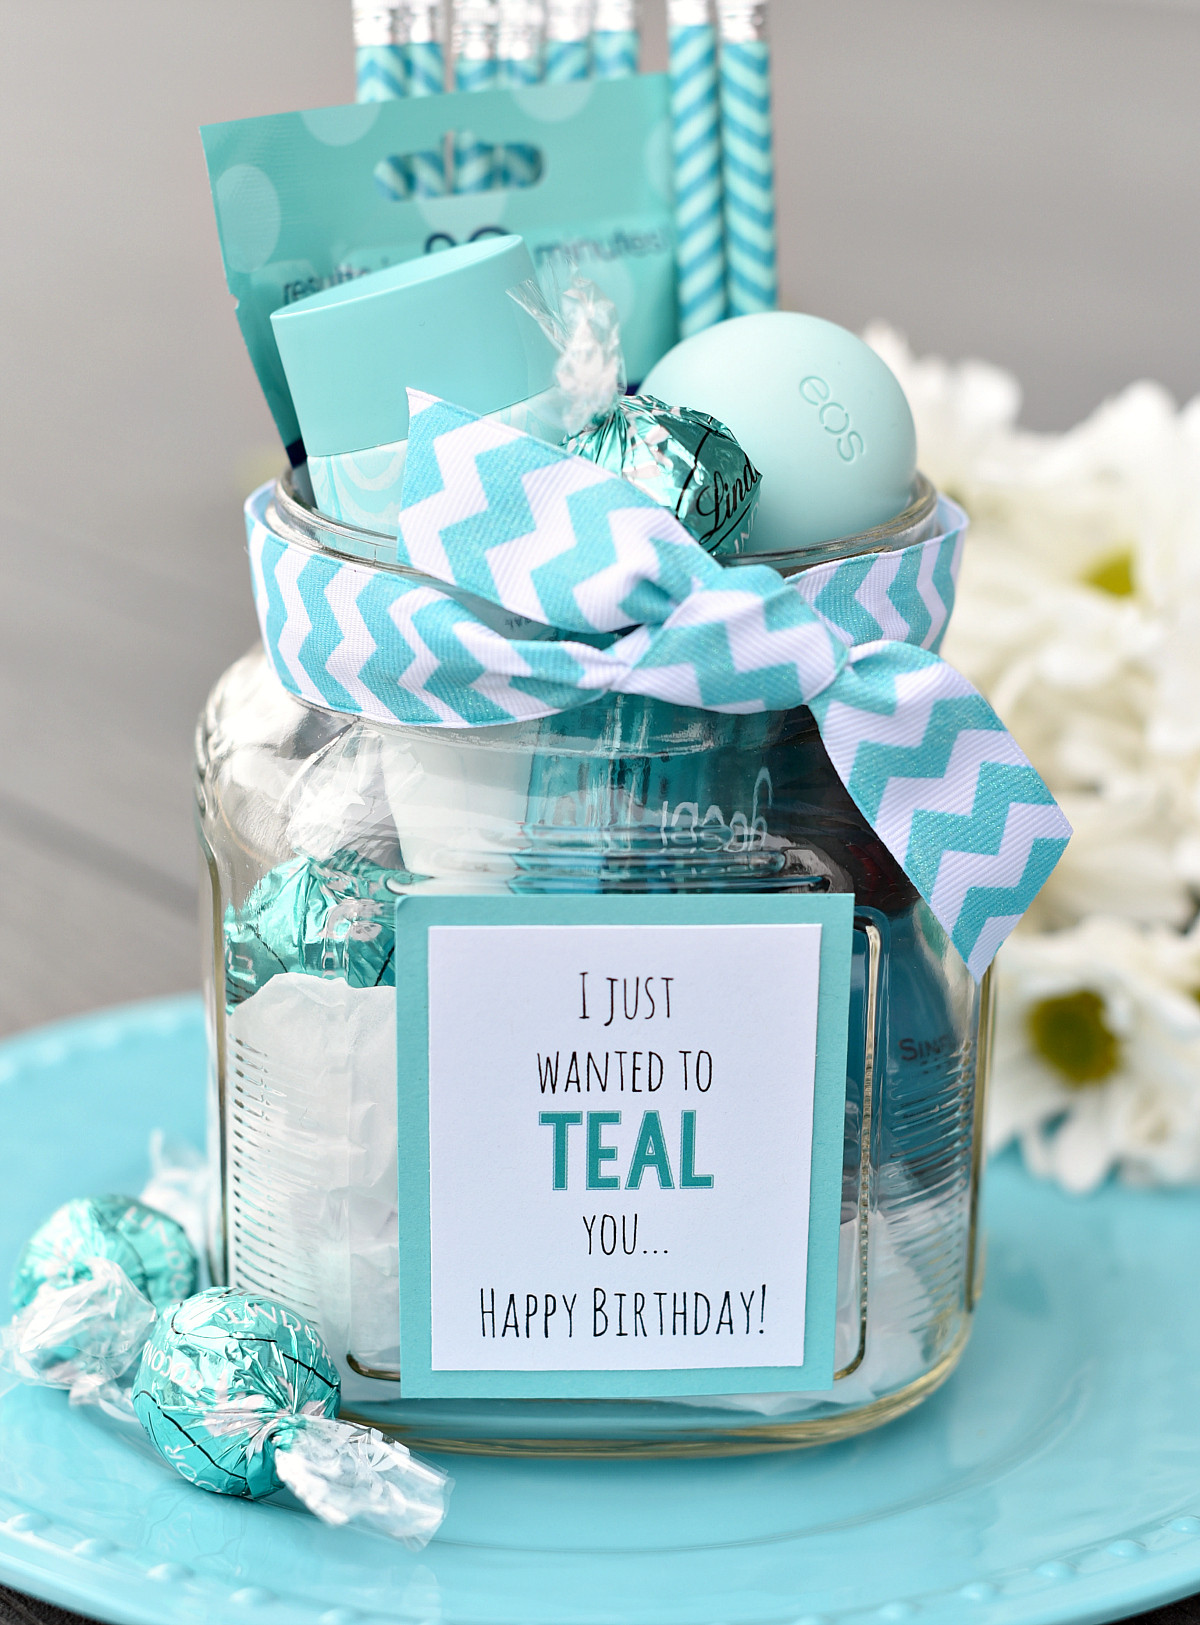 Gift Ideas For Mother'S Birthday
 Teal Birthday Gift Idea for Friends – Fun Squared